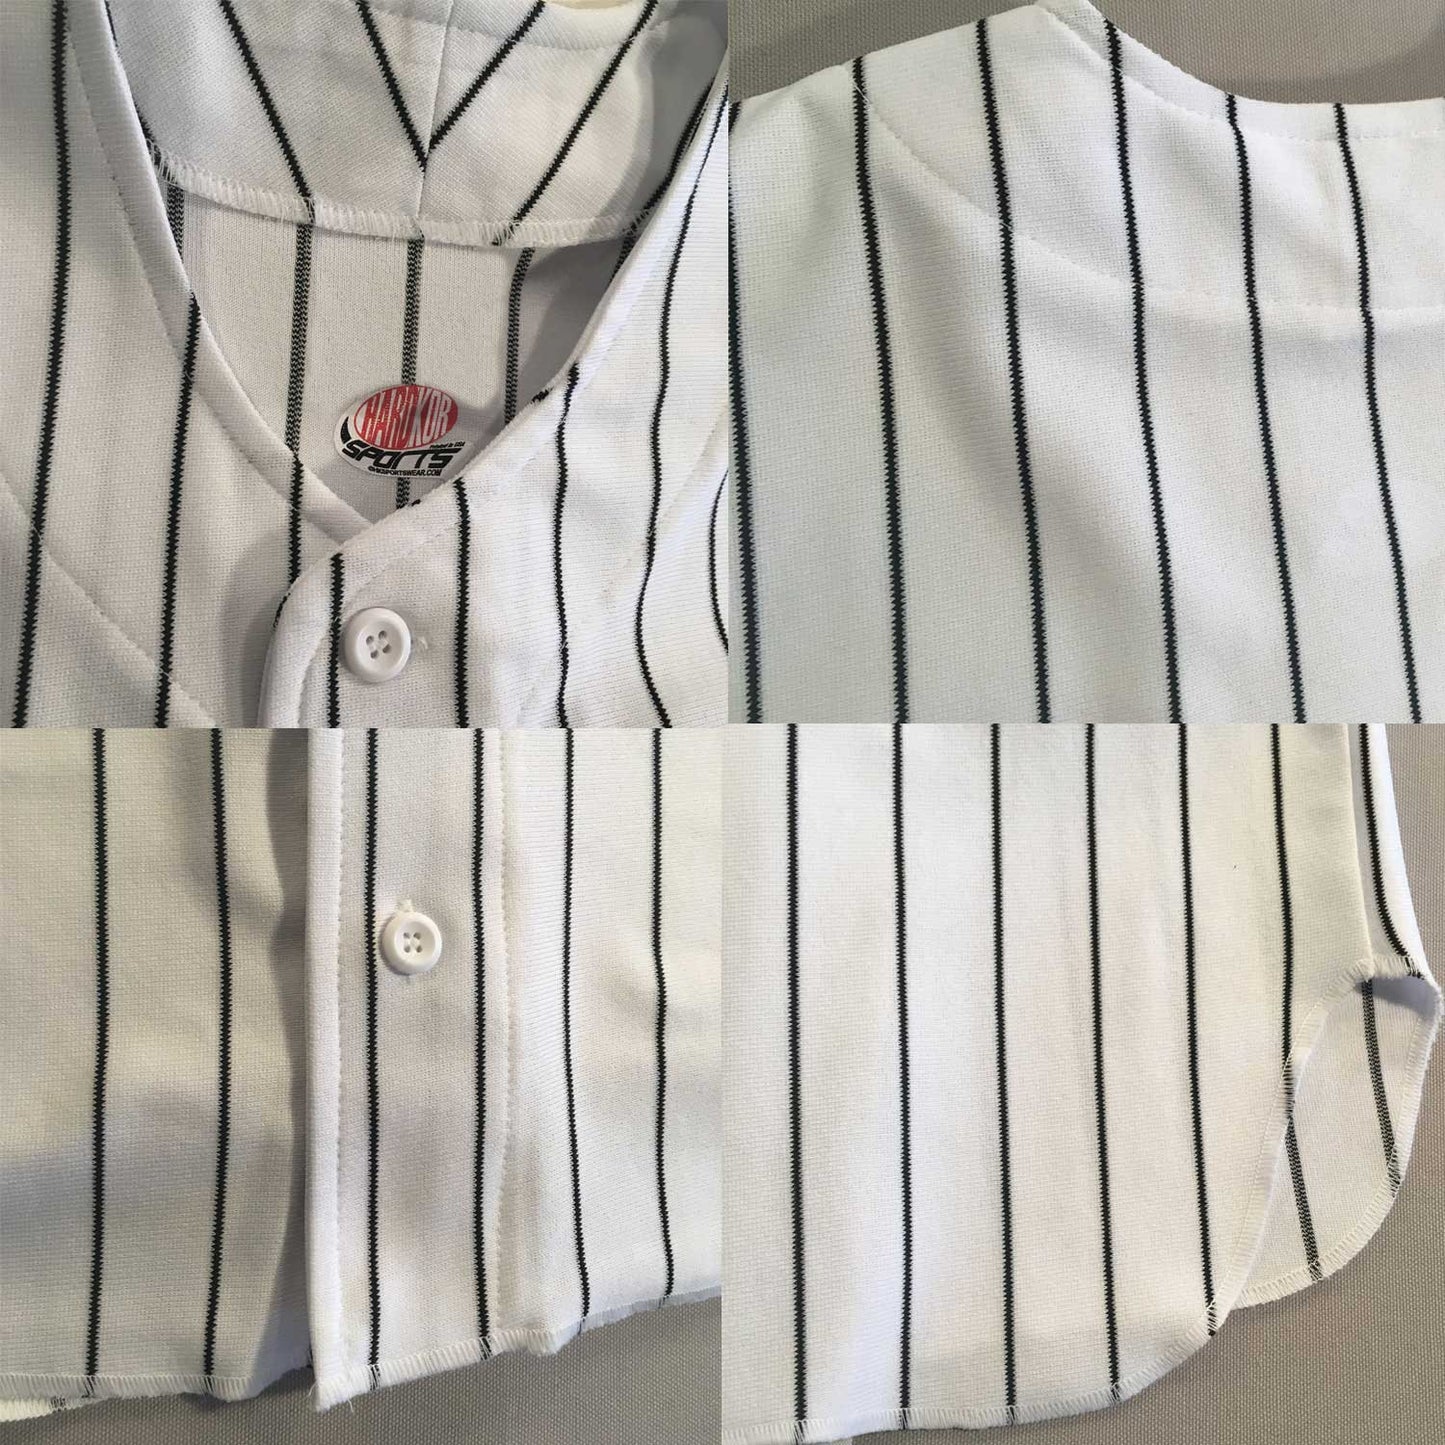 Together Since Anniversary Custom Pinstriped Baseball Jersey| Full Button Down, White with Black Pinstripes Personalized Jersey